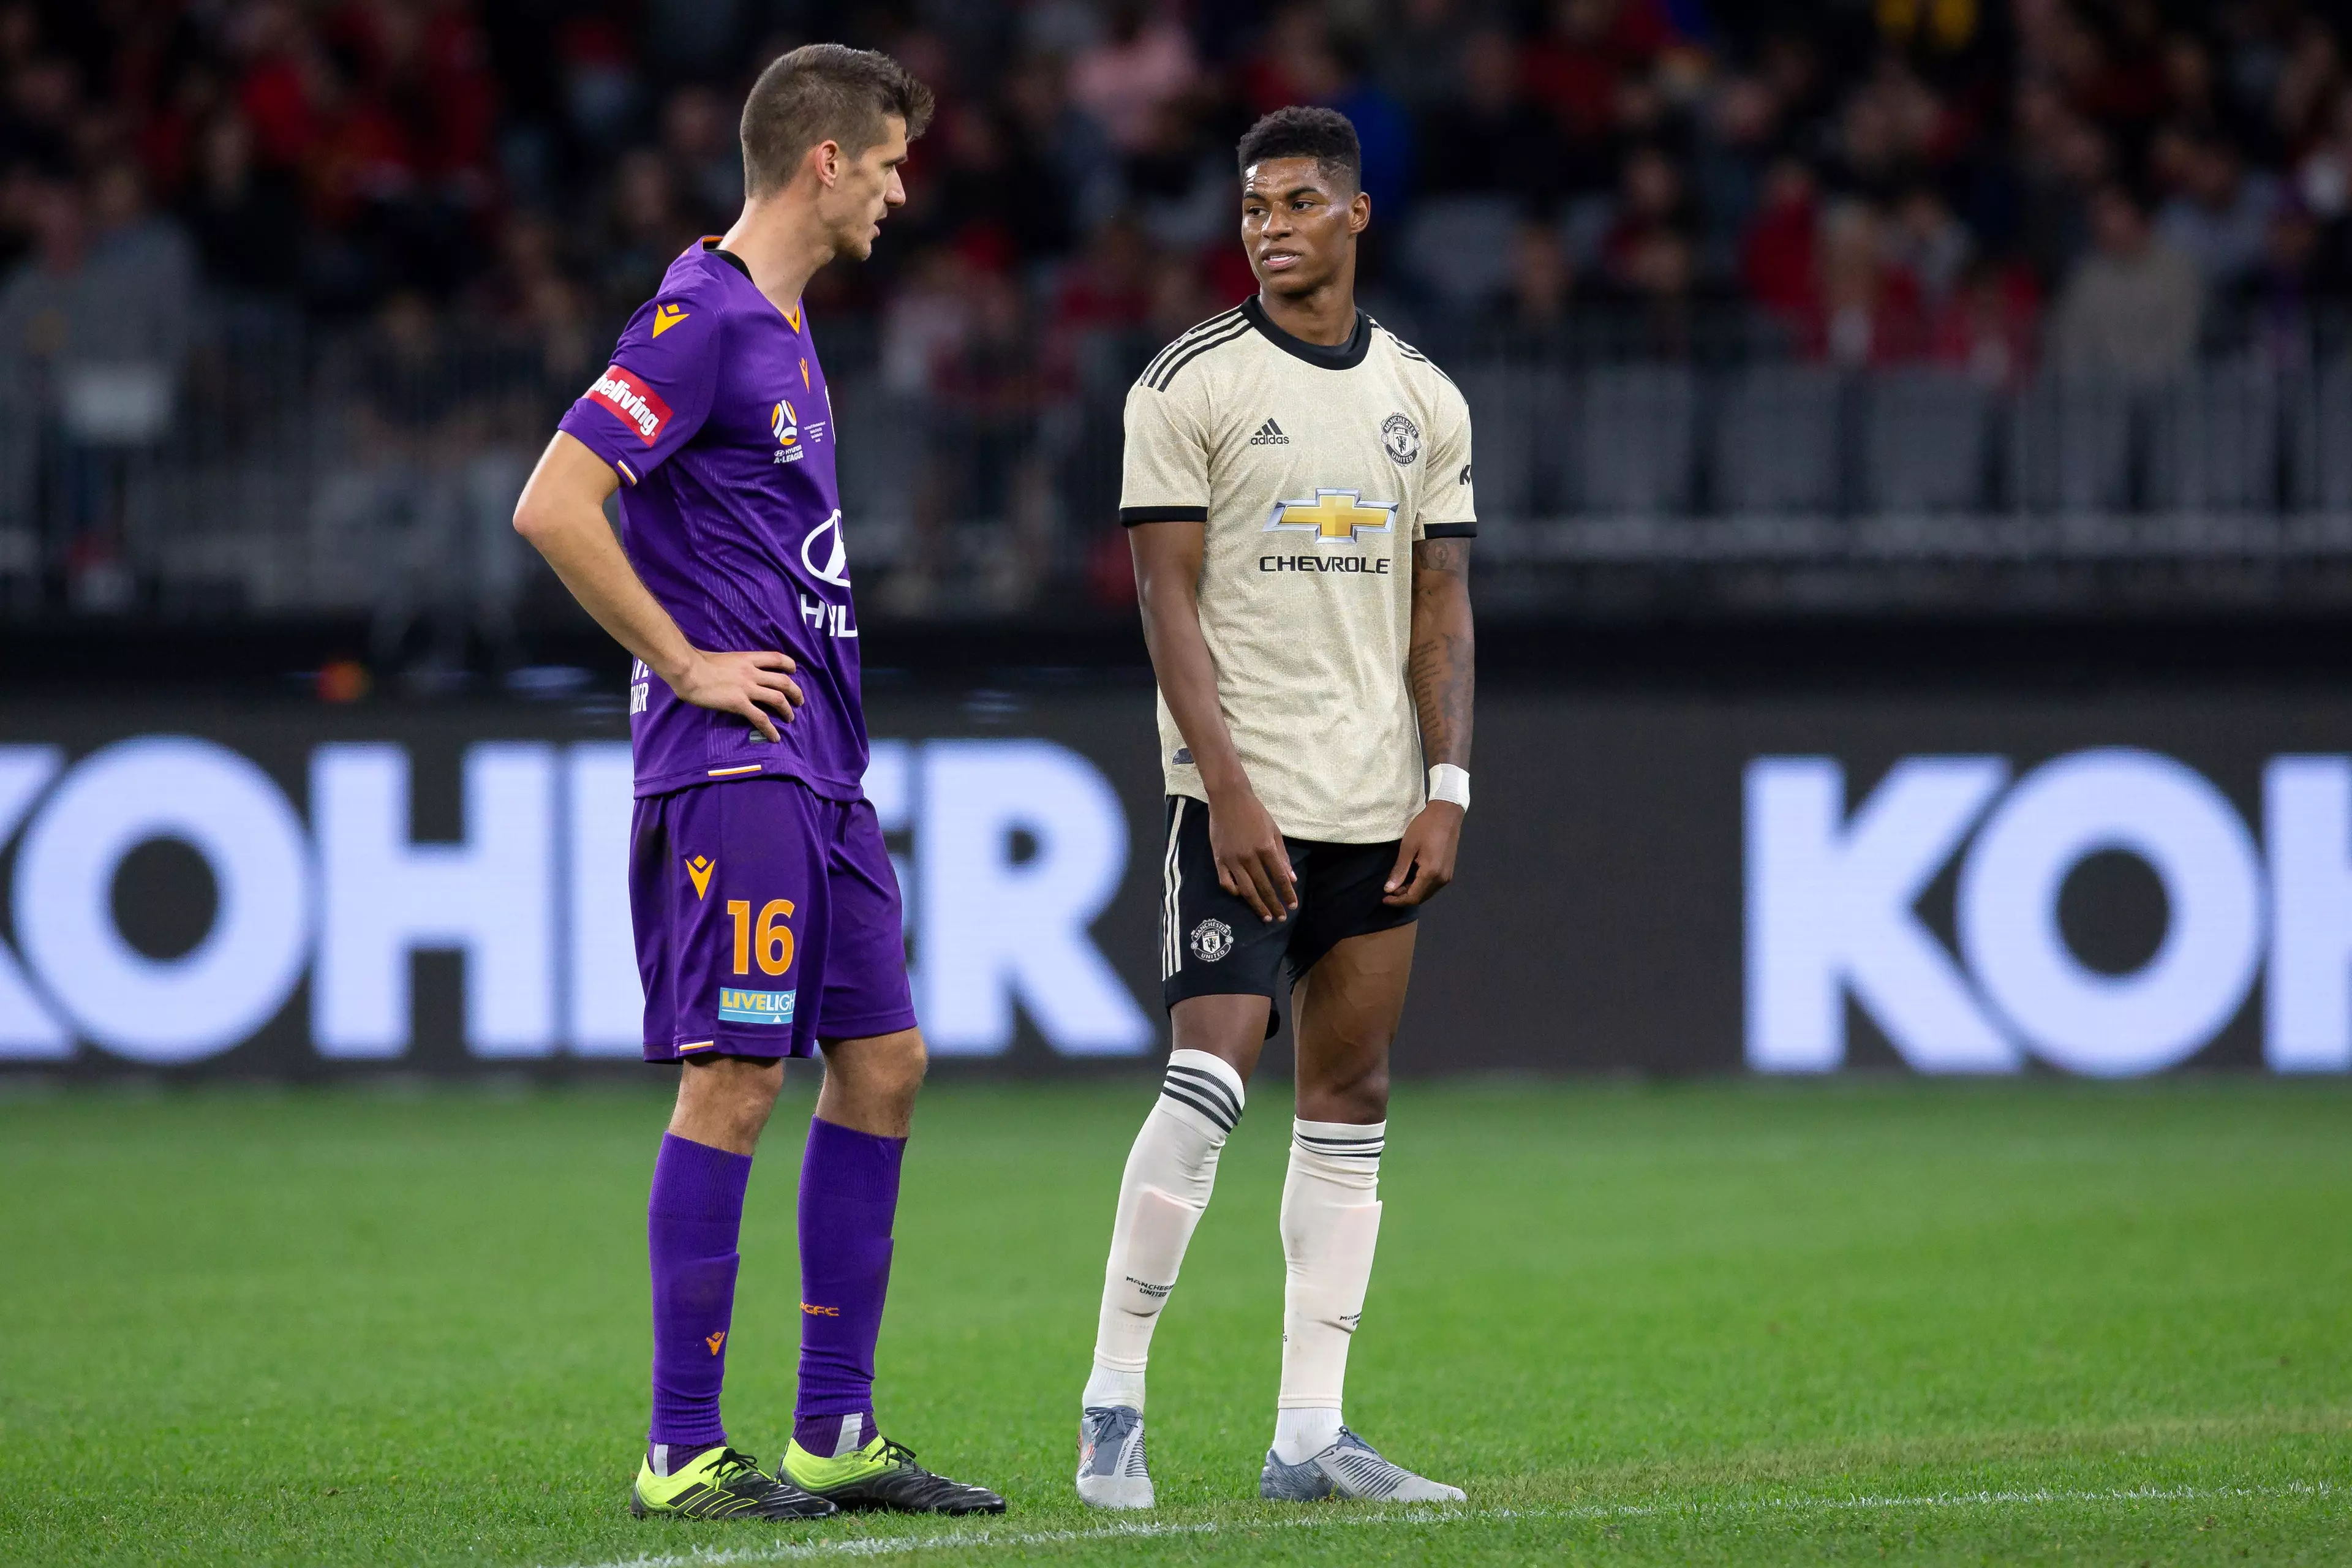 Rashford scored in the first pre season friendly against Perth Glory. Image: PA Images